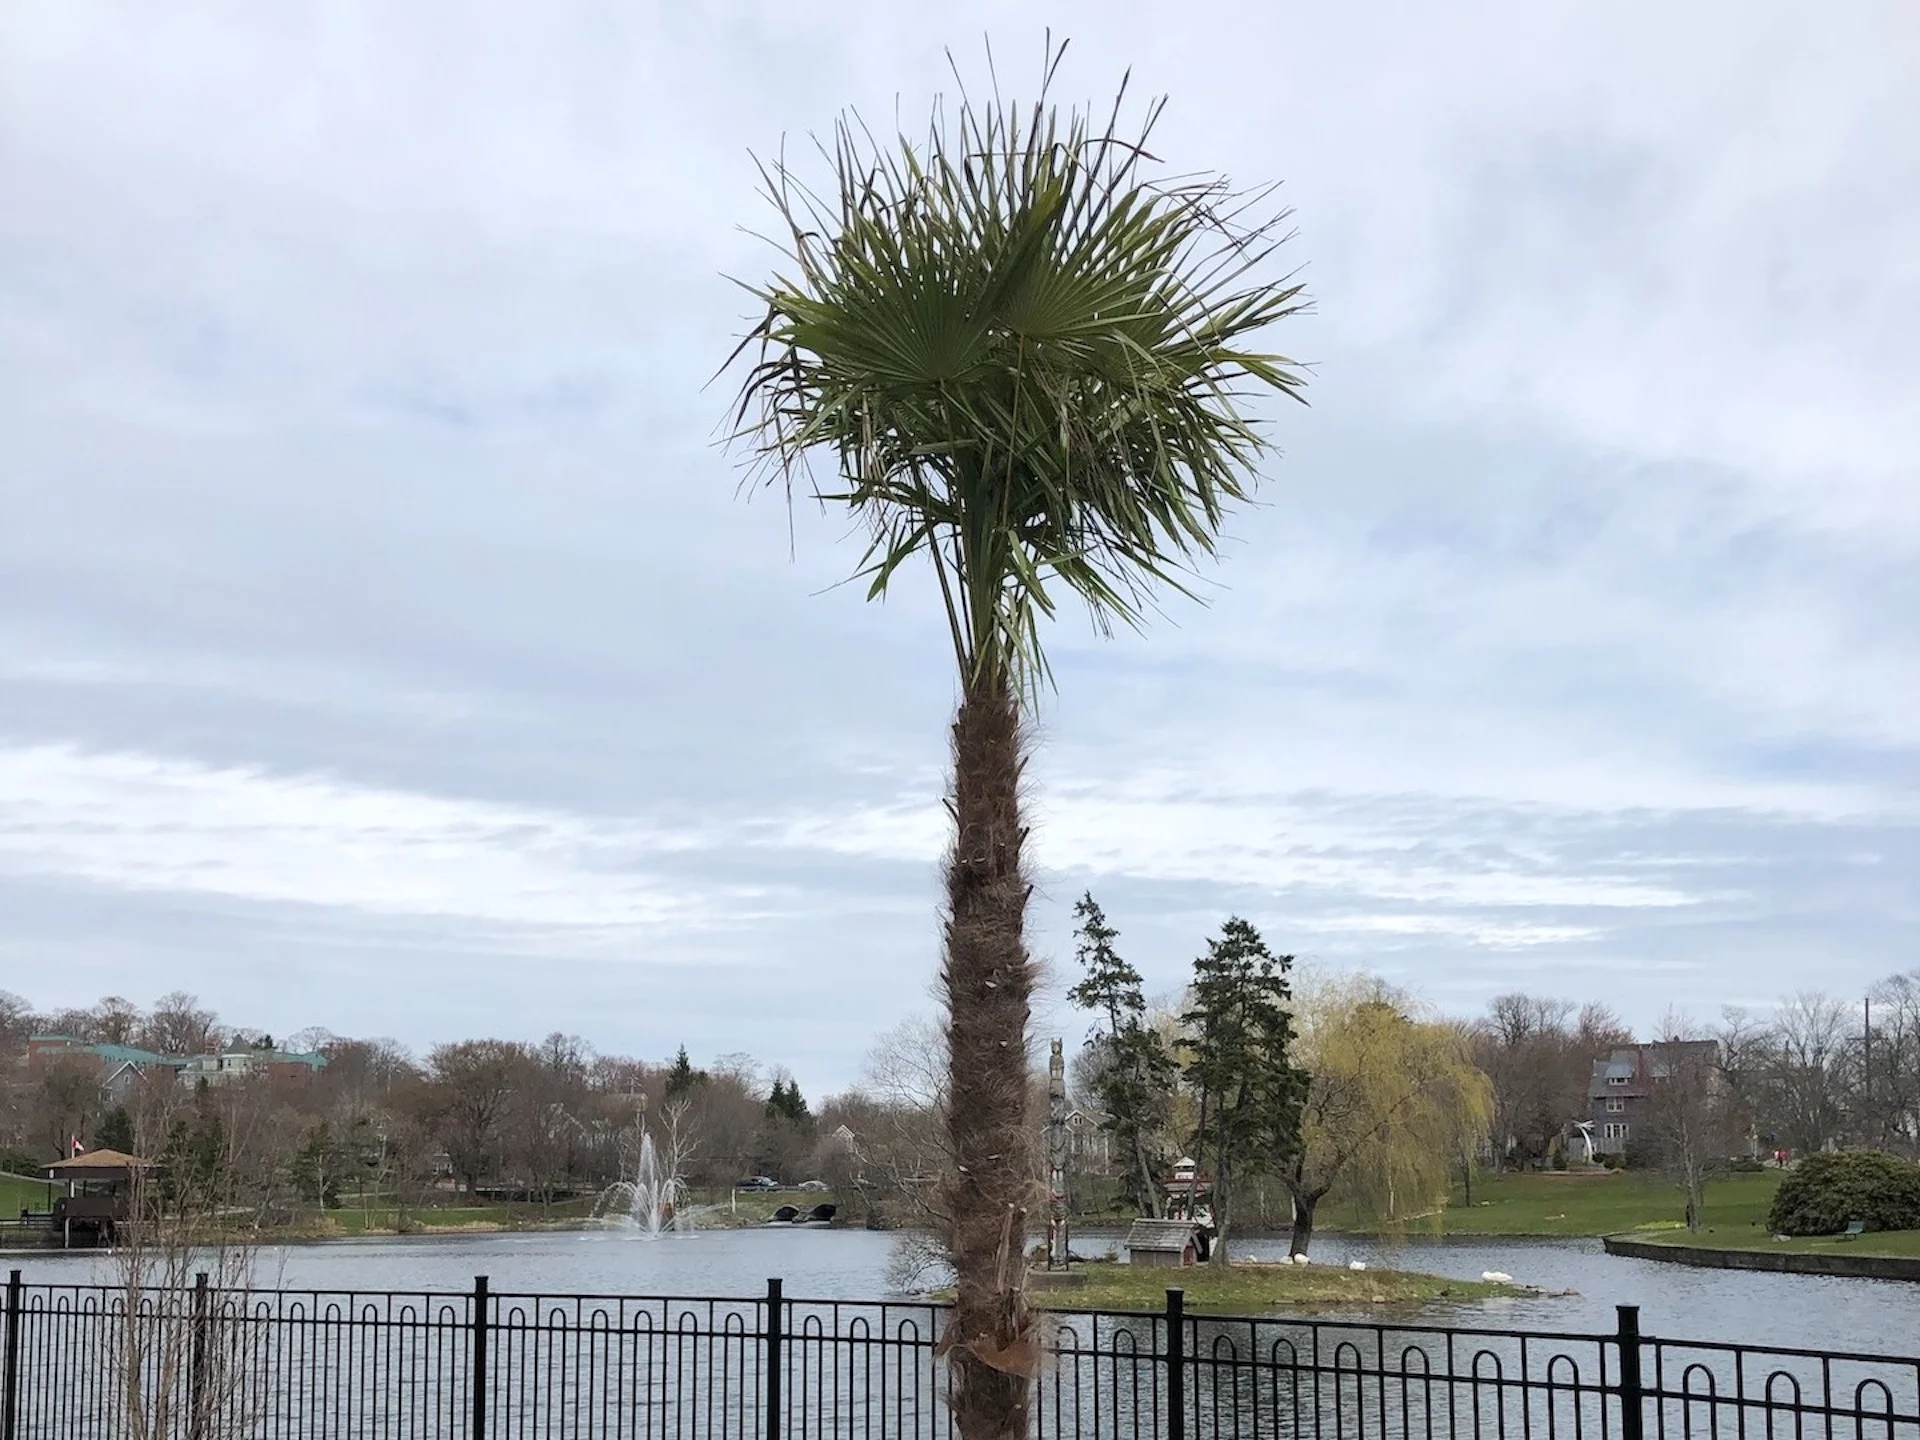 Ever wonder what happened to Halifax's palm trees? Find out the fate of its 2018 pilot program, here